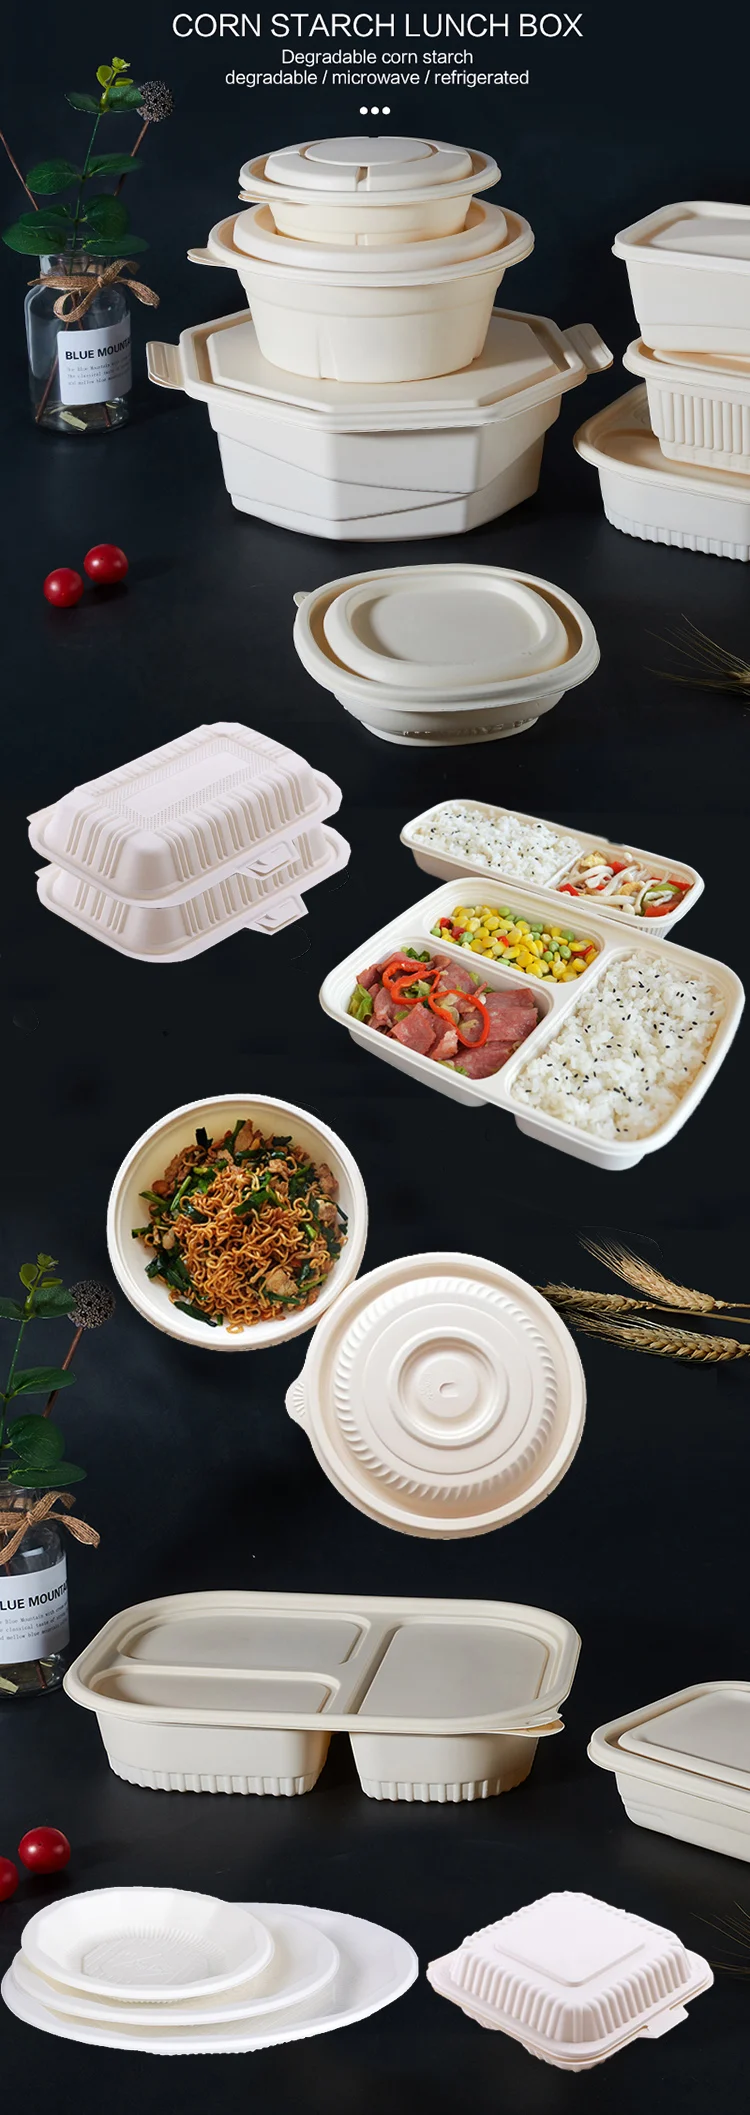 Disposable Food Containers Fast Meal Tray Biodegradable Lunch Box For Take away Corn Starch Container